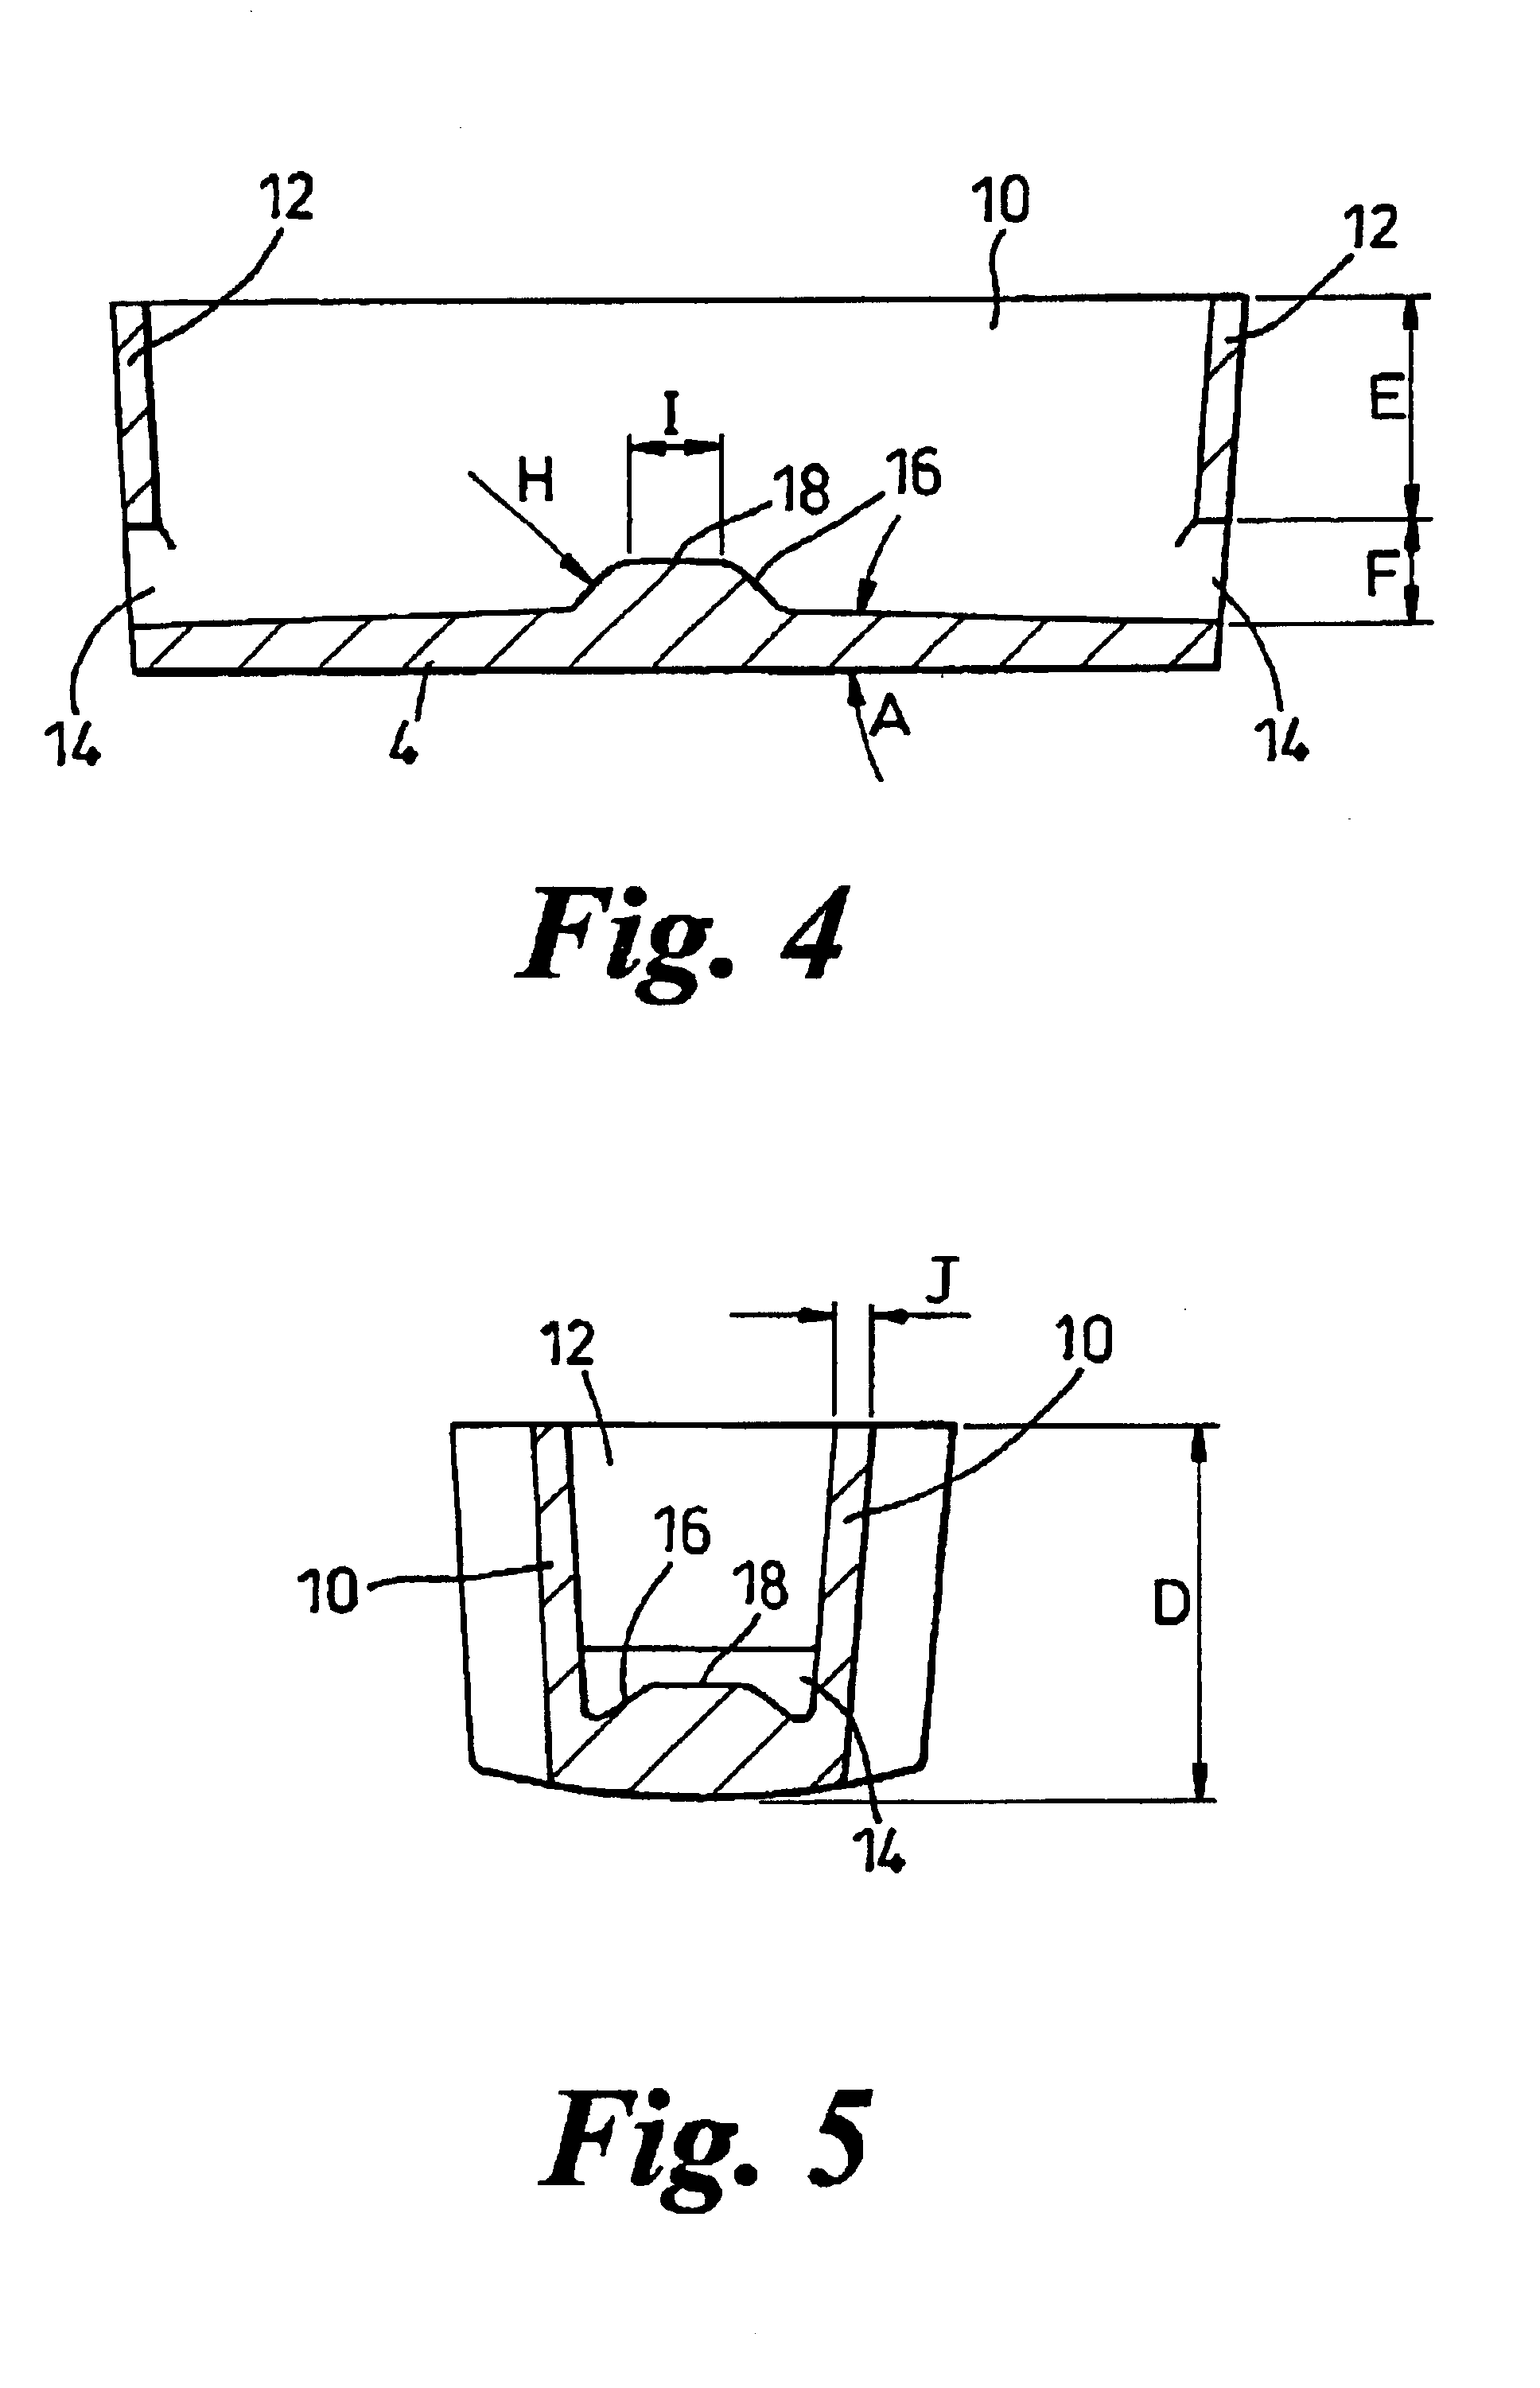 Distributor device for use in metal casting